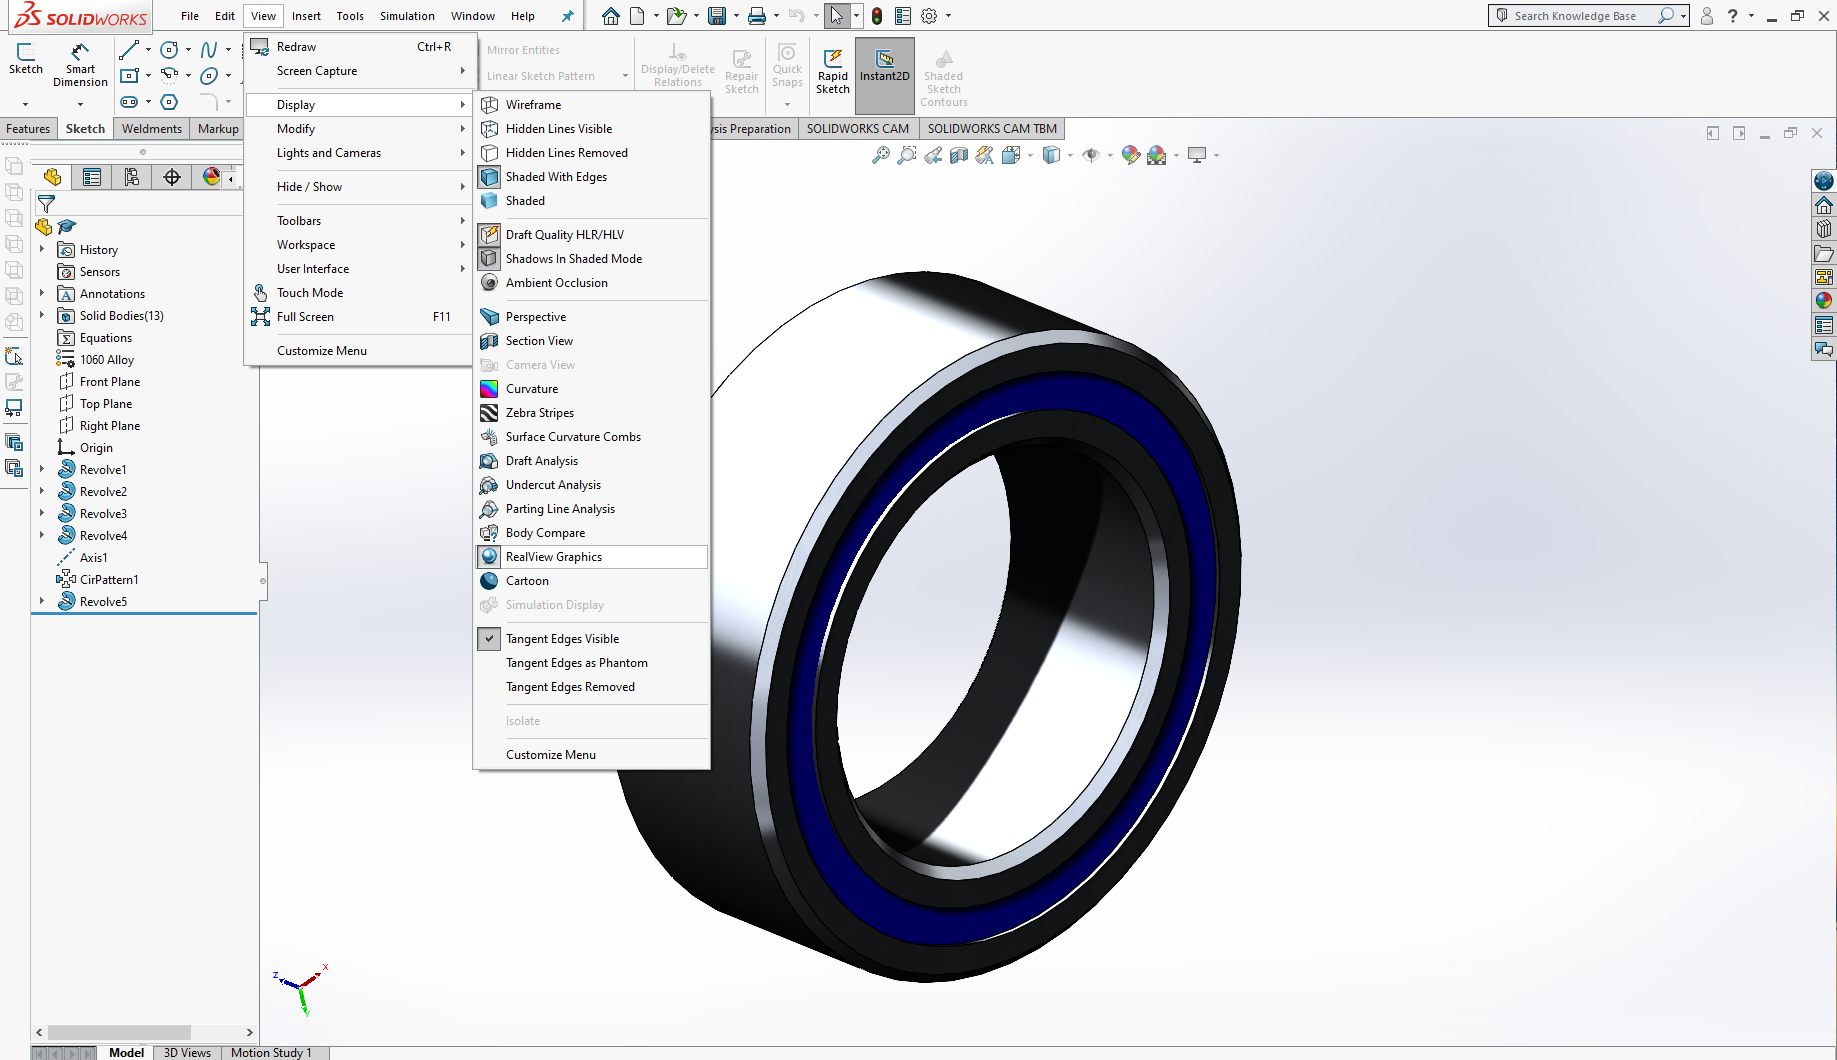 solidworks realview download